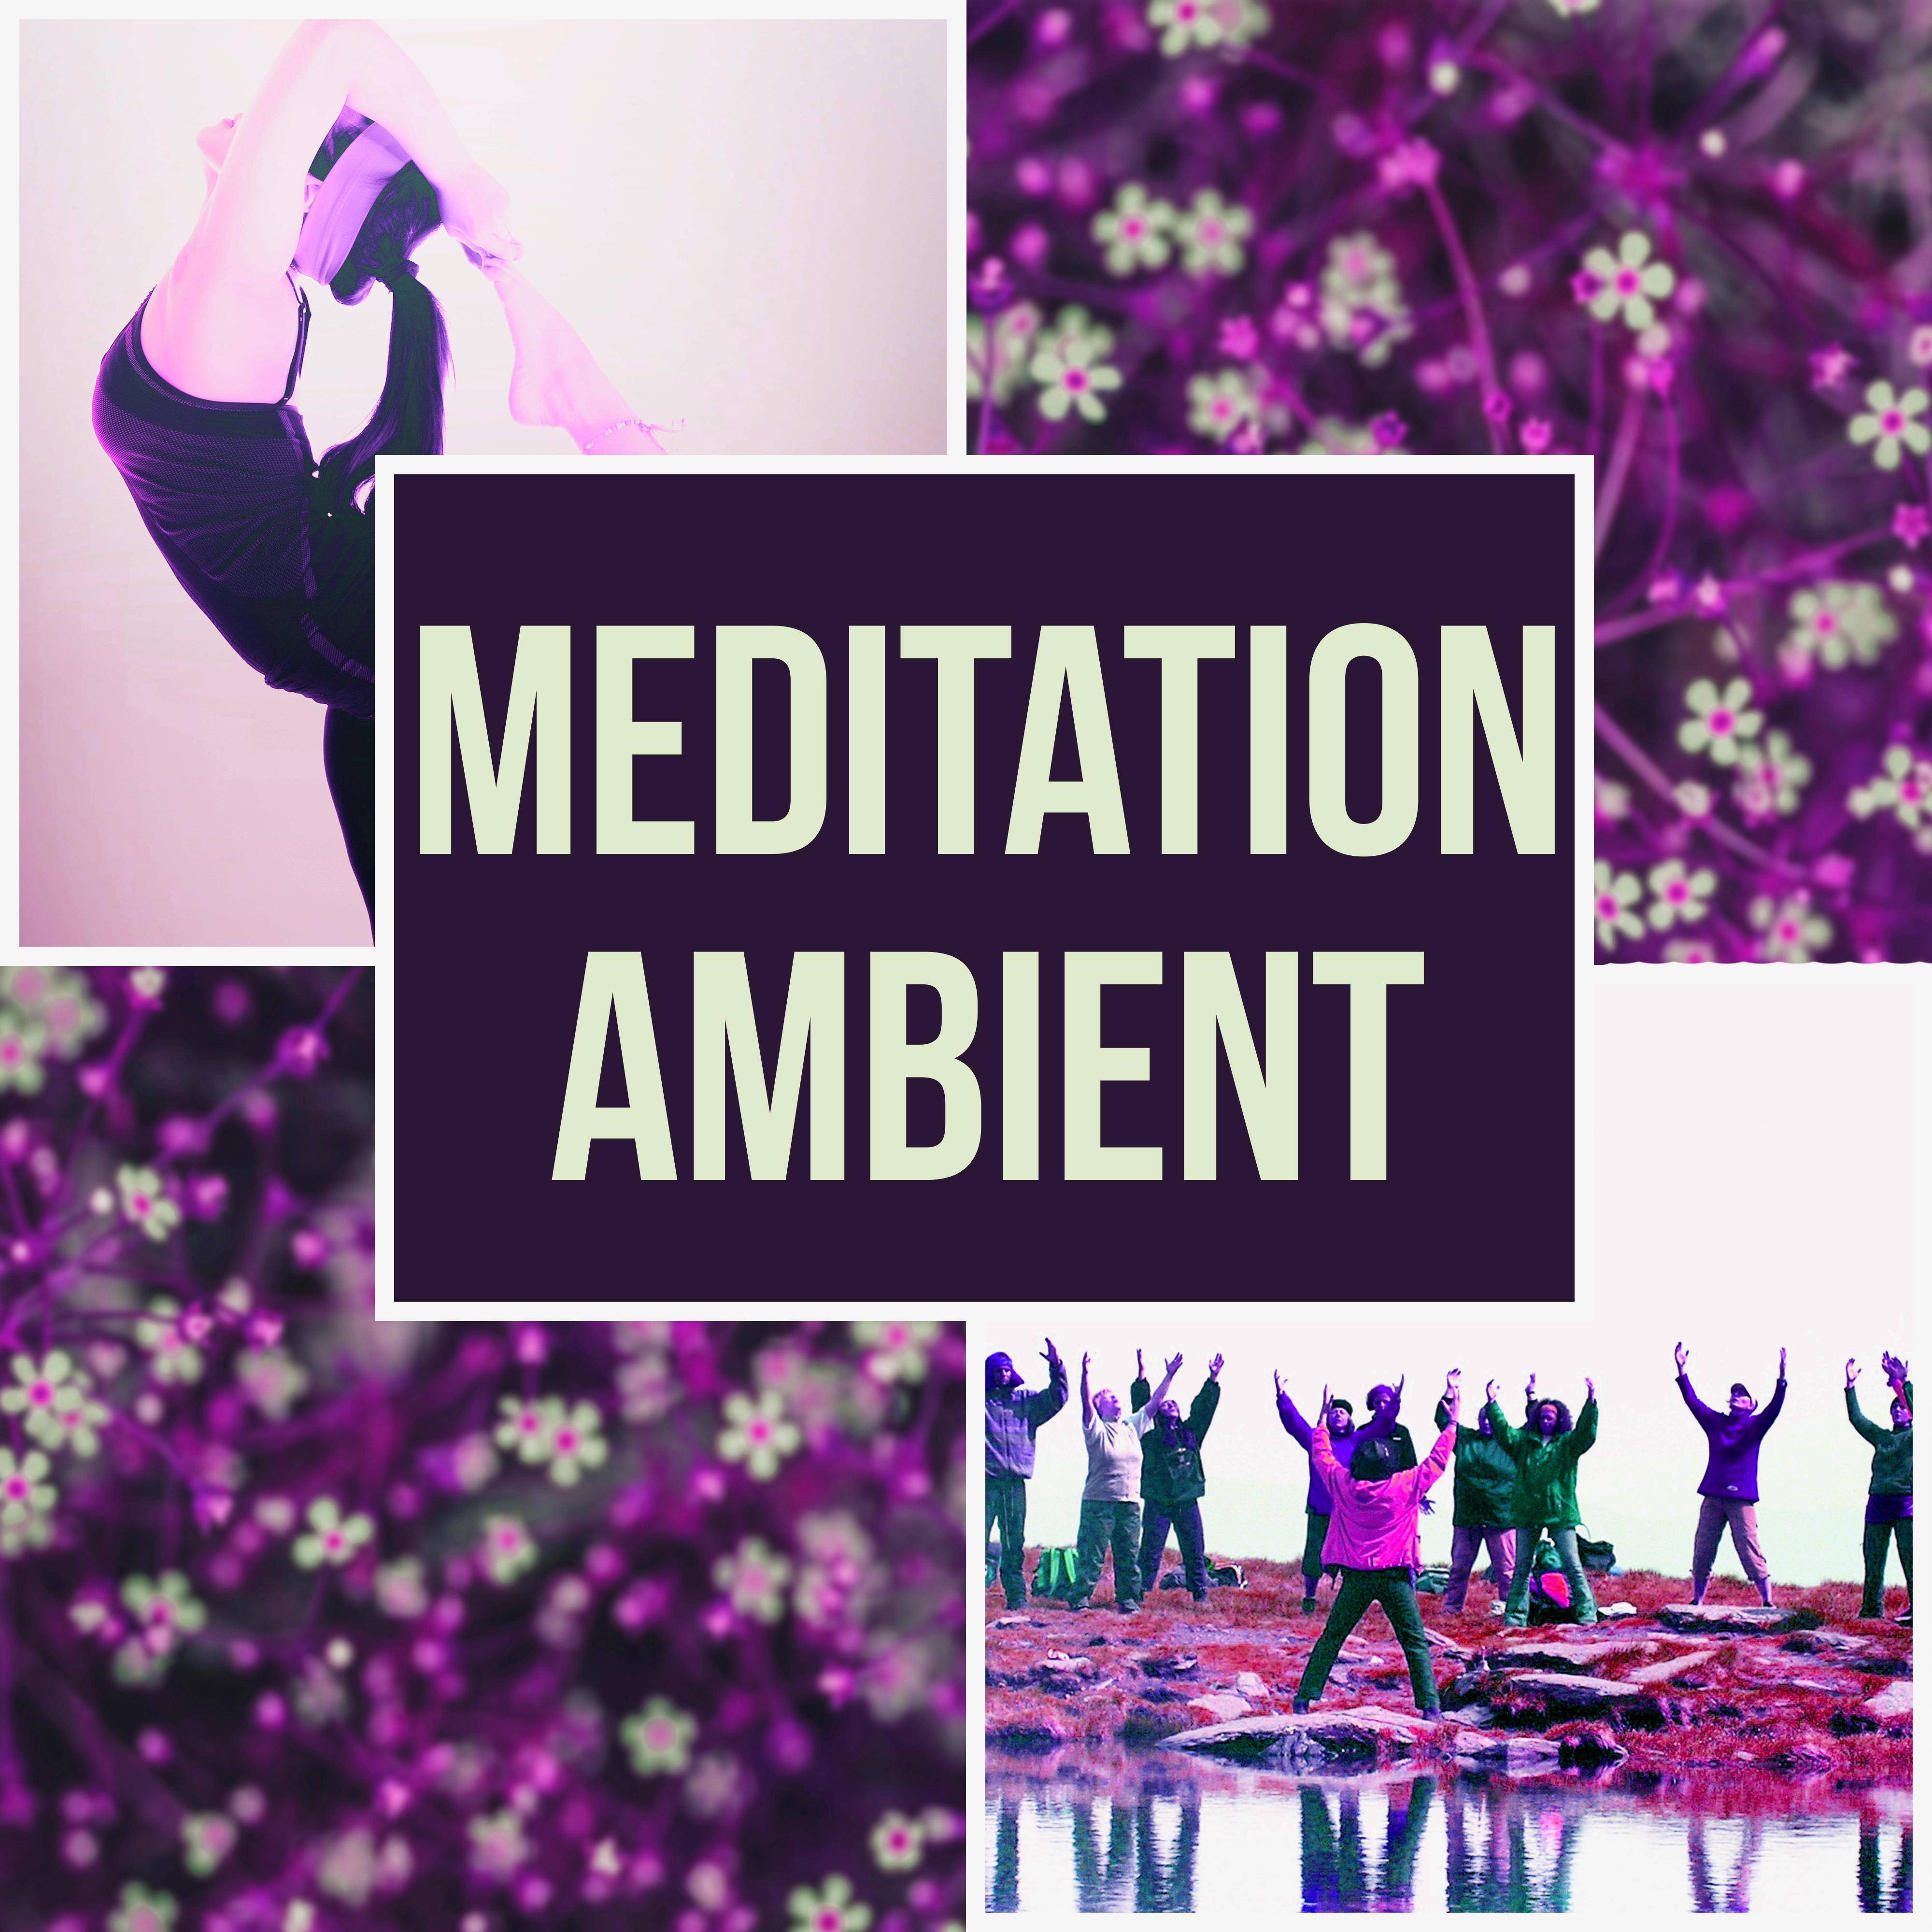 Meditation Ambient  Calm Music, Nature Sounds, Yoga, Background Music, Easy Listening, Mindfulness